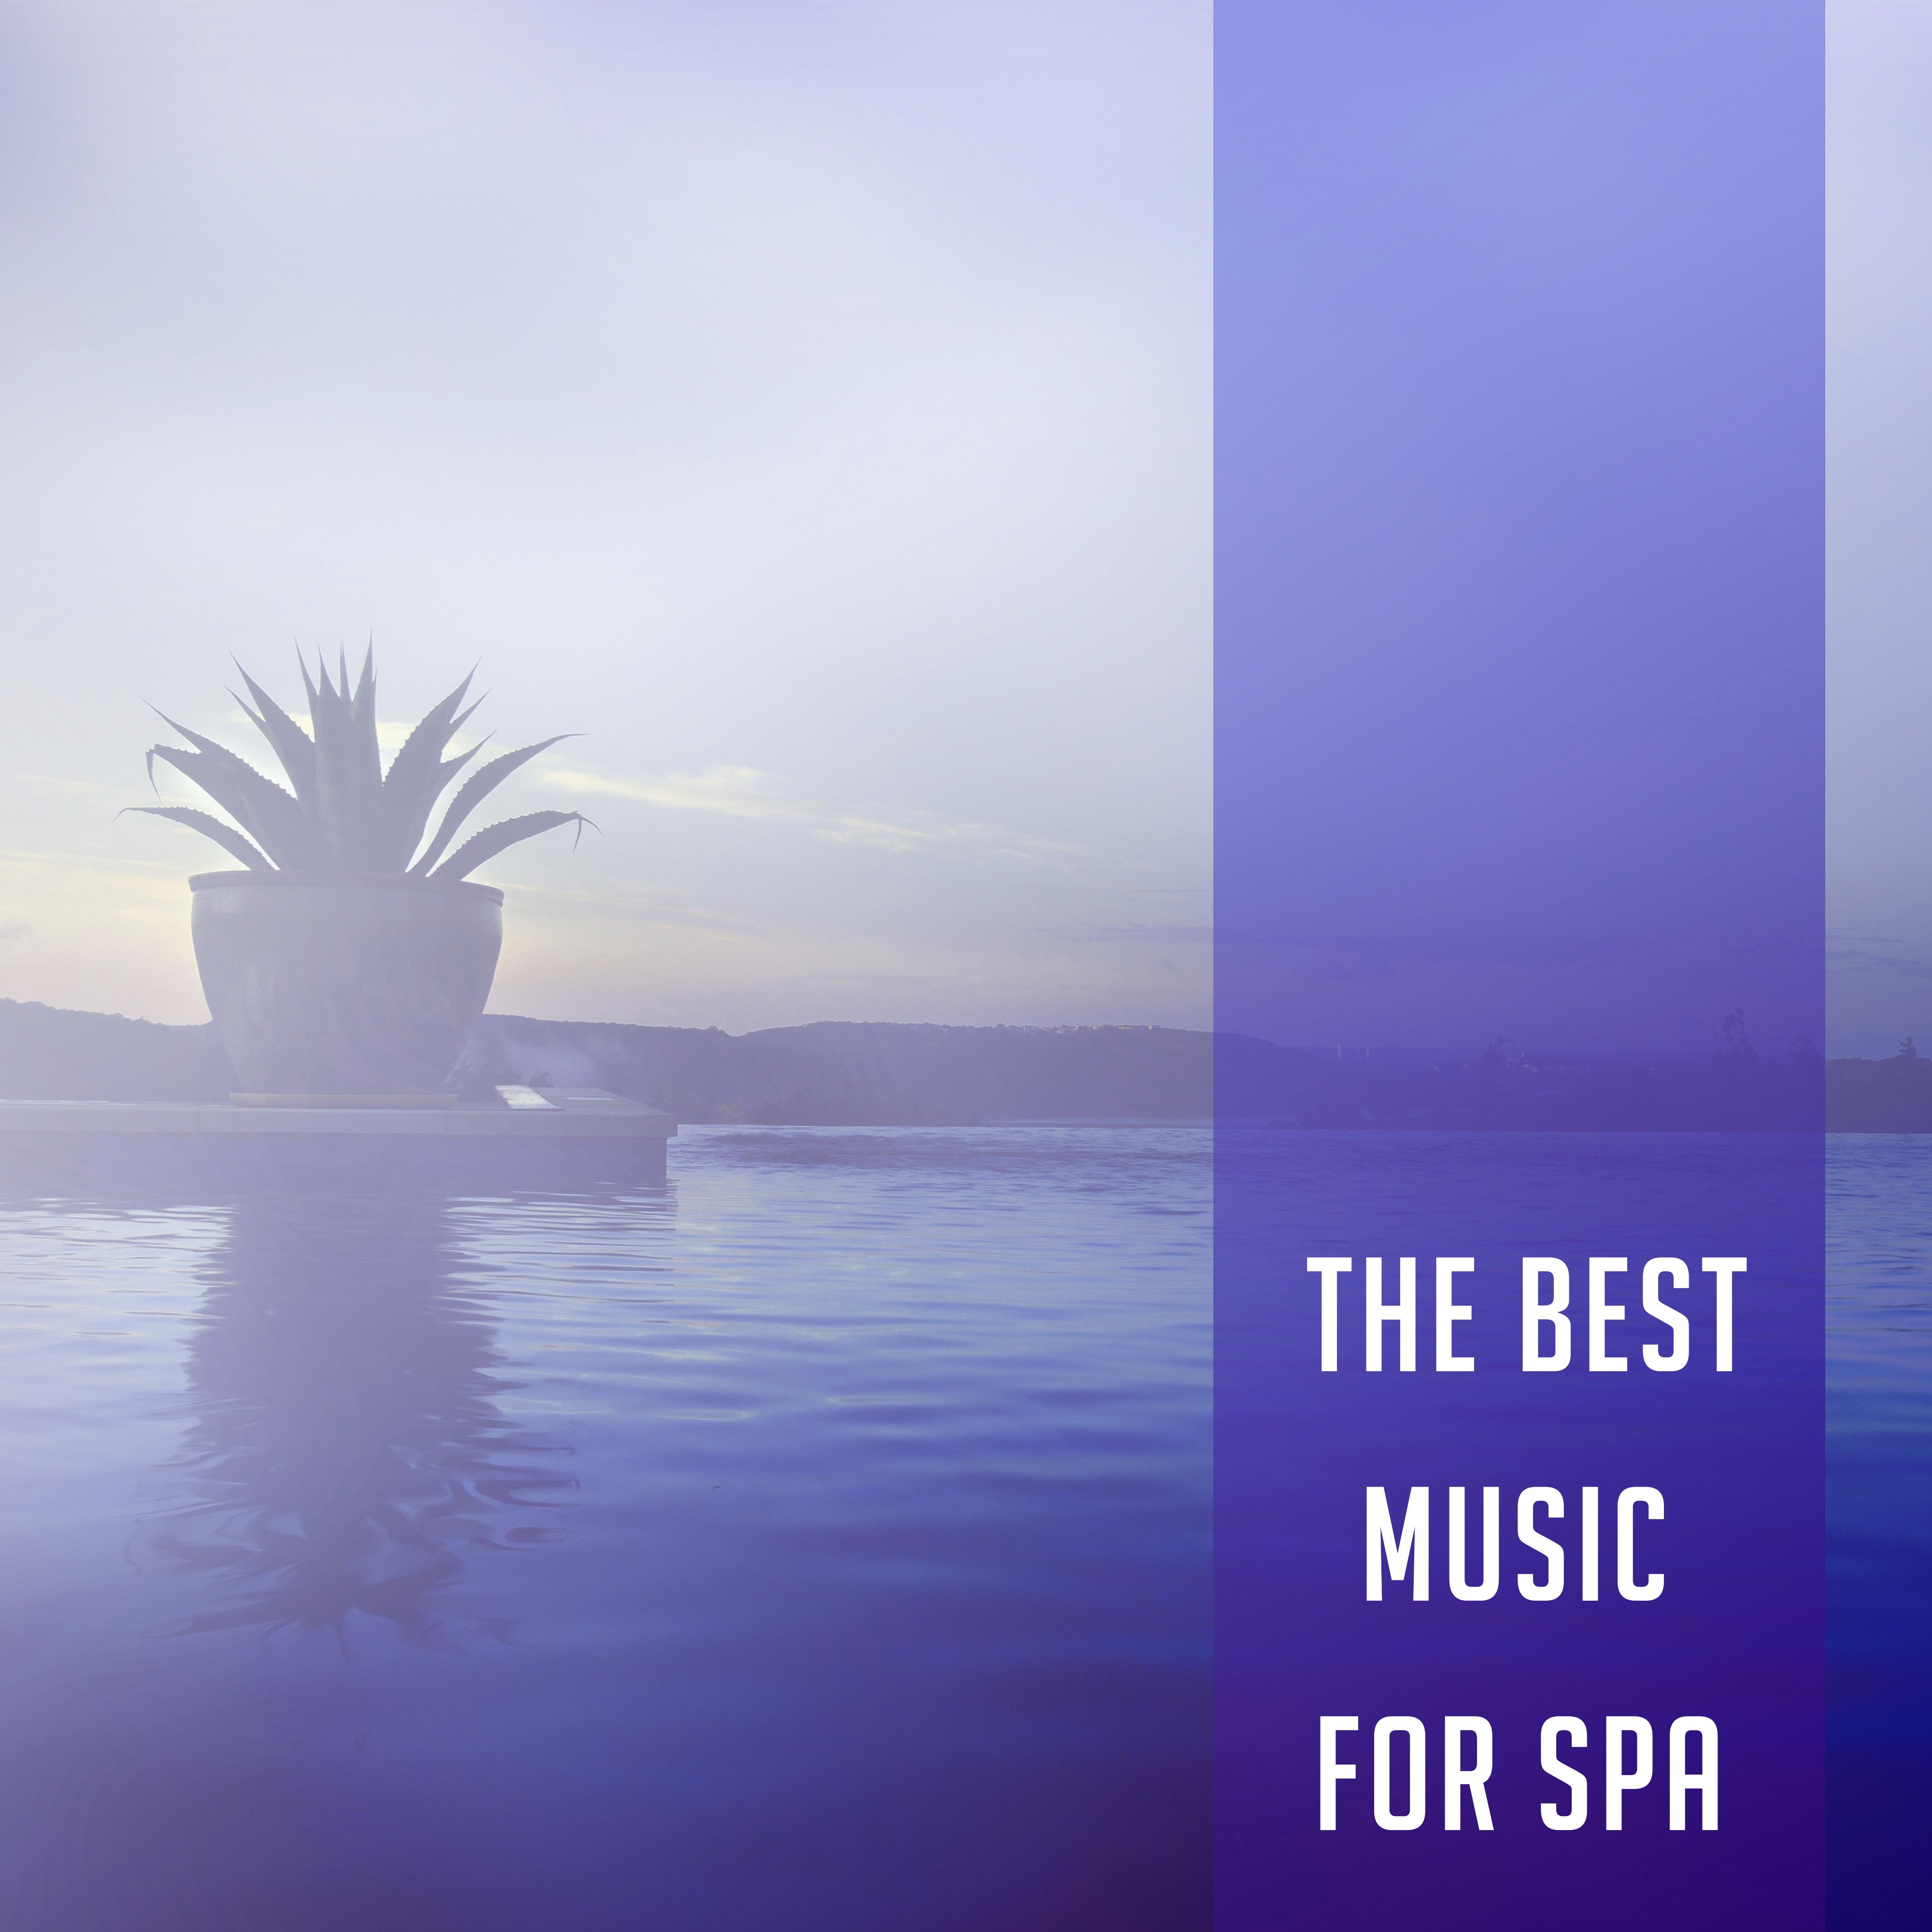 The Best Music for Spa  Relaxation Wellness, Massage Therapy, Soothing Sounds, Healing Body, Anti Stress Music, Spa Dreams, Zen